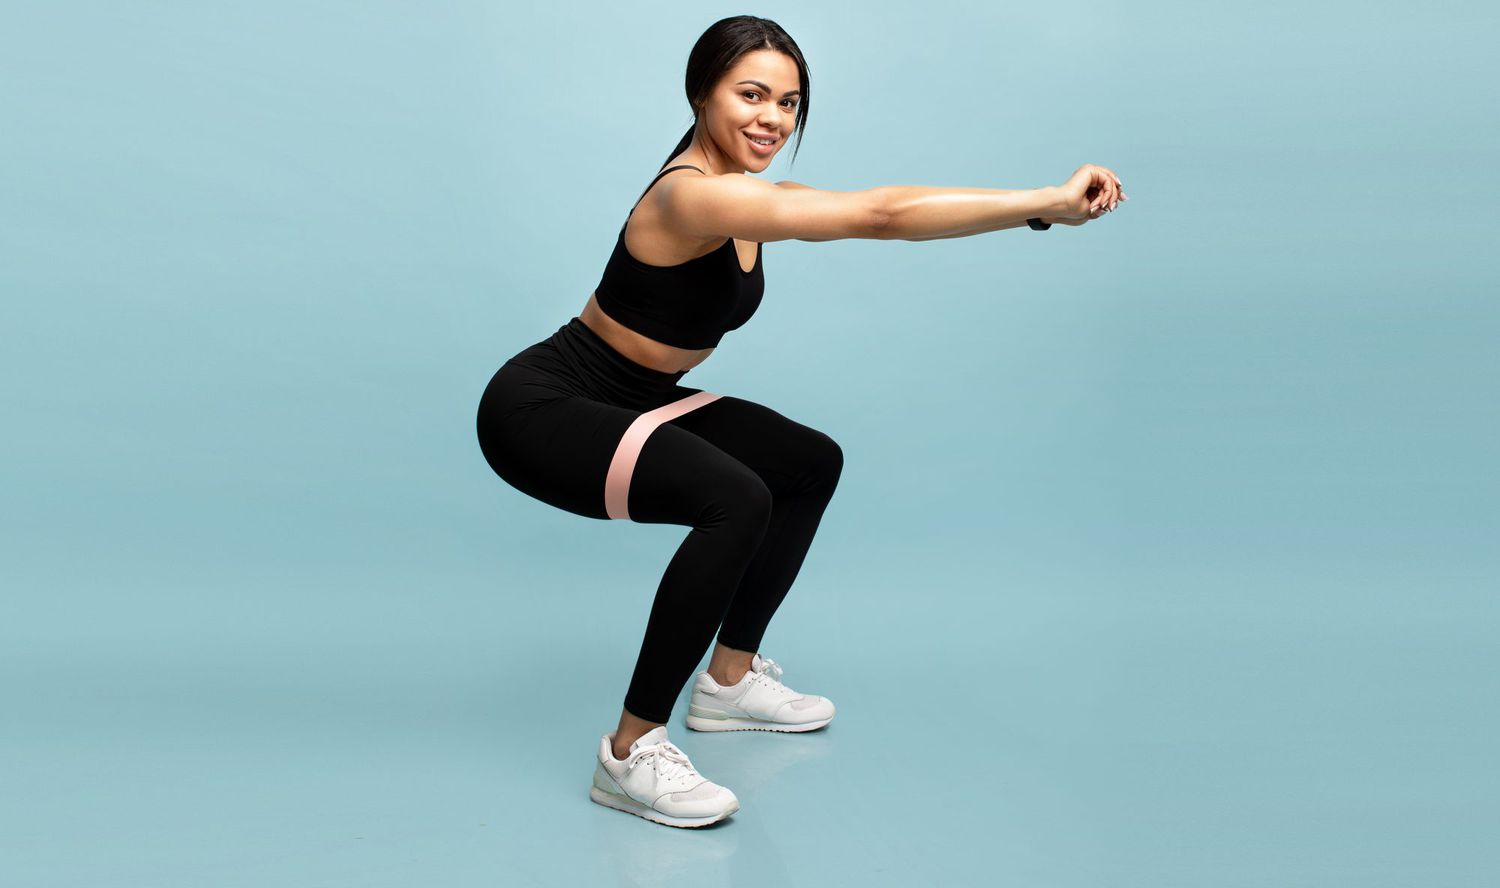 Strength workout concept. woman doing squats with fitness resistance band over blue background